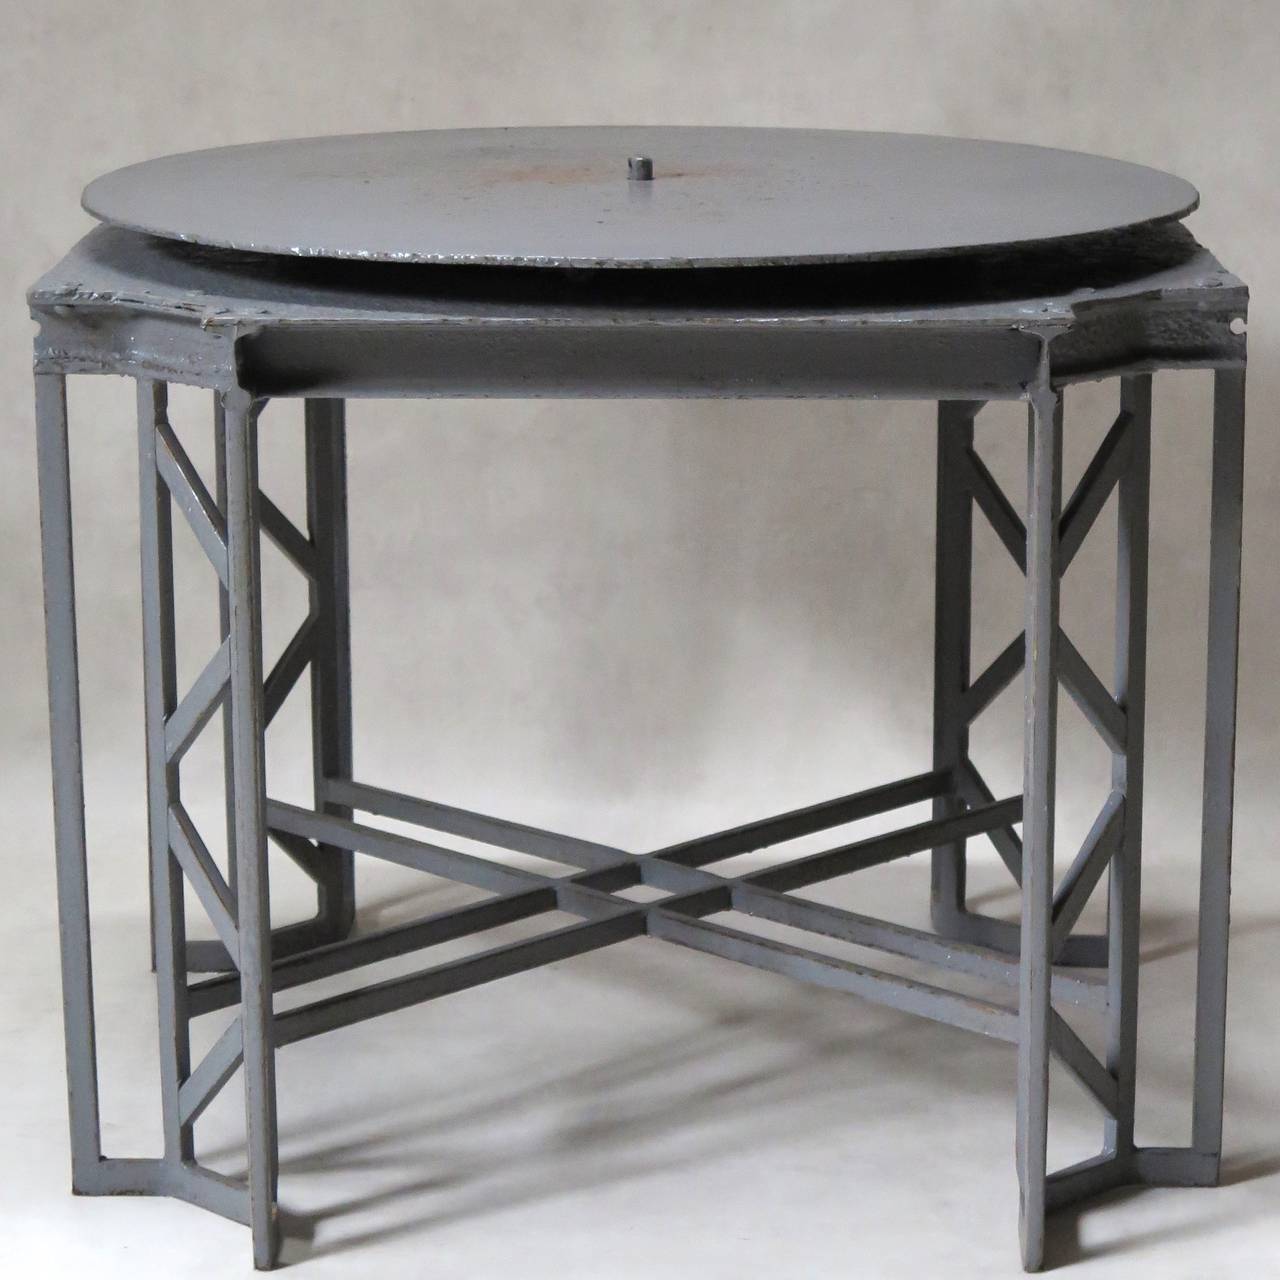 A large and unusual wrought iron sculptor's stool, painted grey.